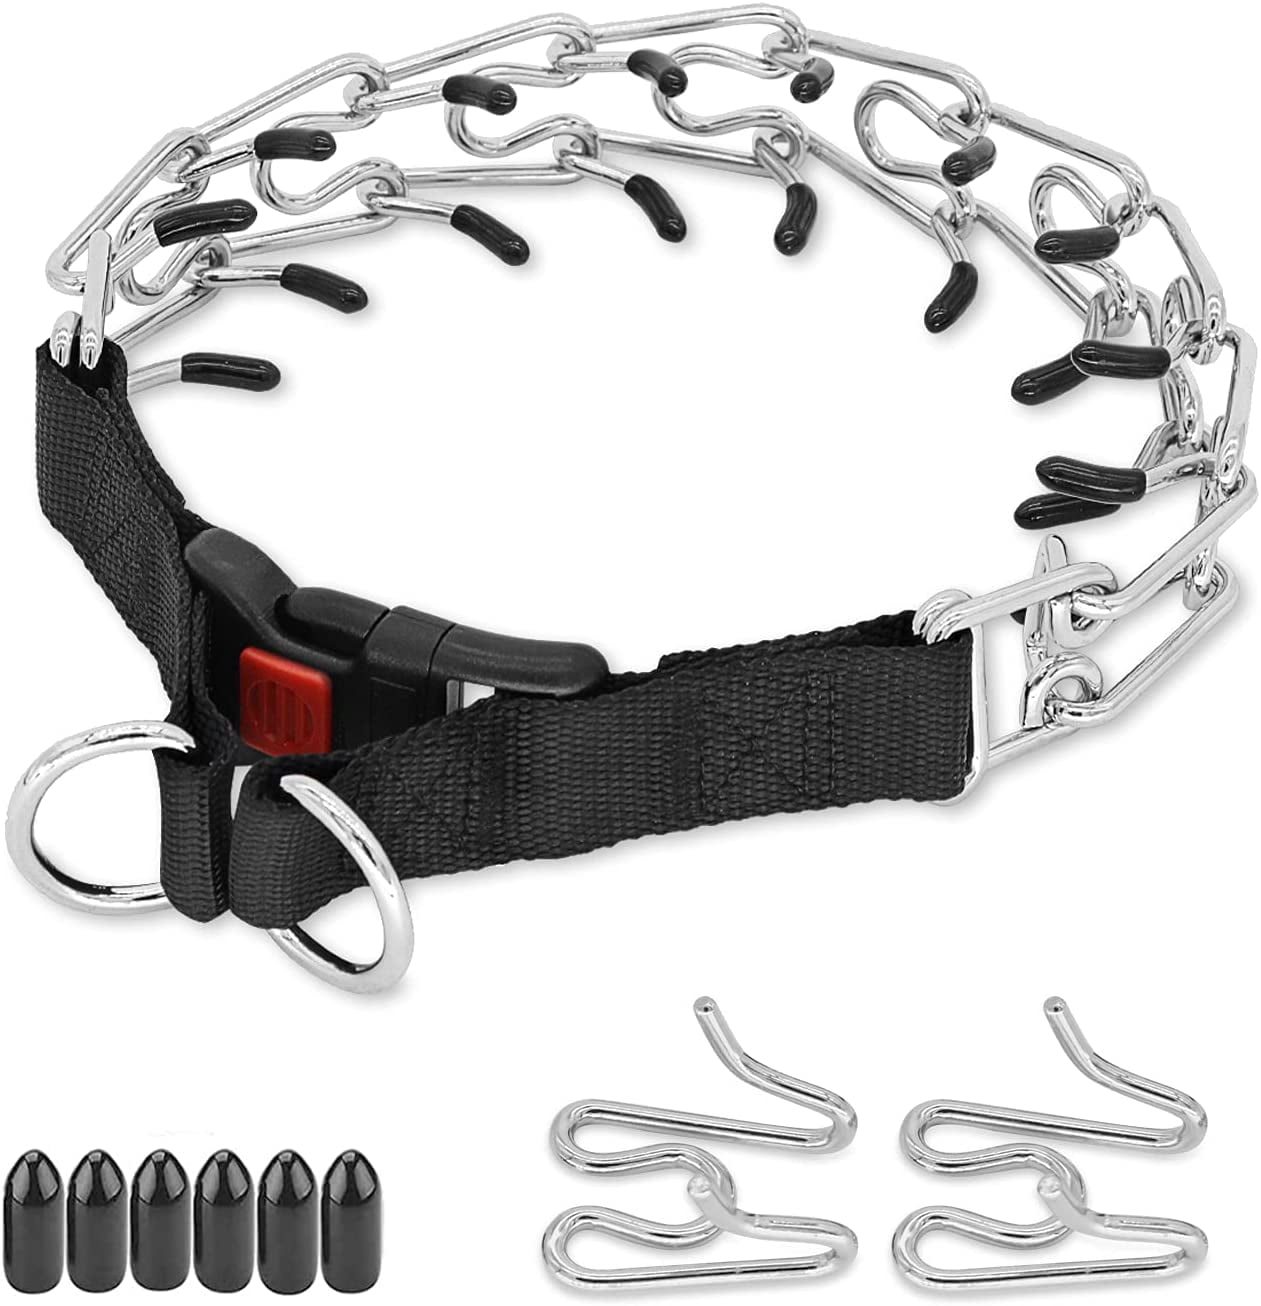 No Pull Dog Collar Training Collar Heavy Duty Packed with 10 Extra Tips CBB PET Dog Choke Collar for Large Dogs Prong Pinch Collar with Quick Release Adjustable Links with Comfort Rubber Tips 